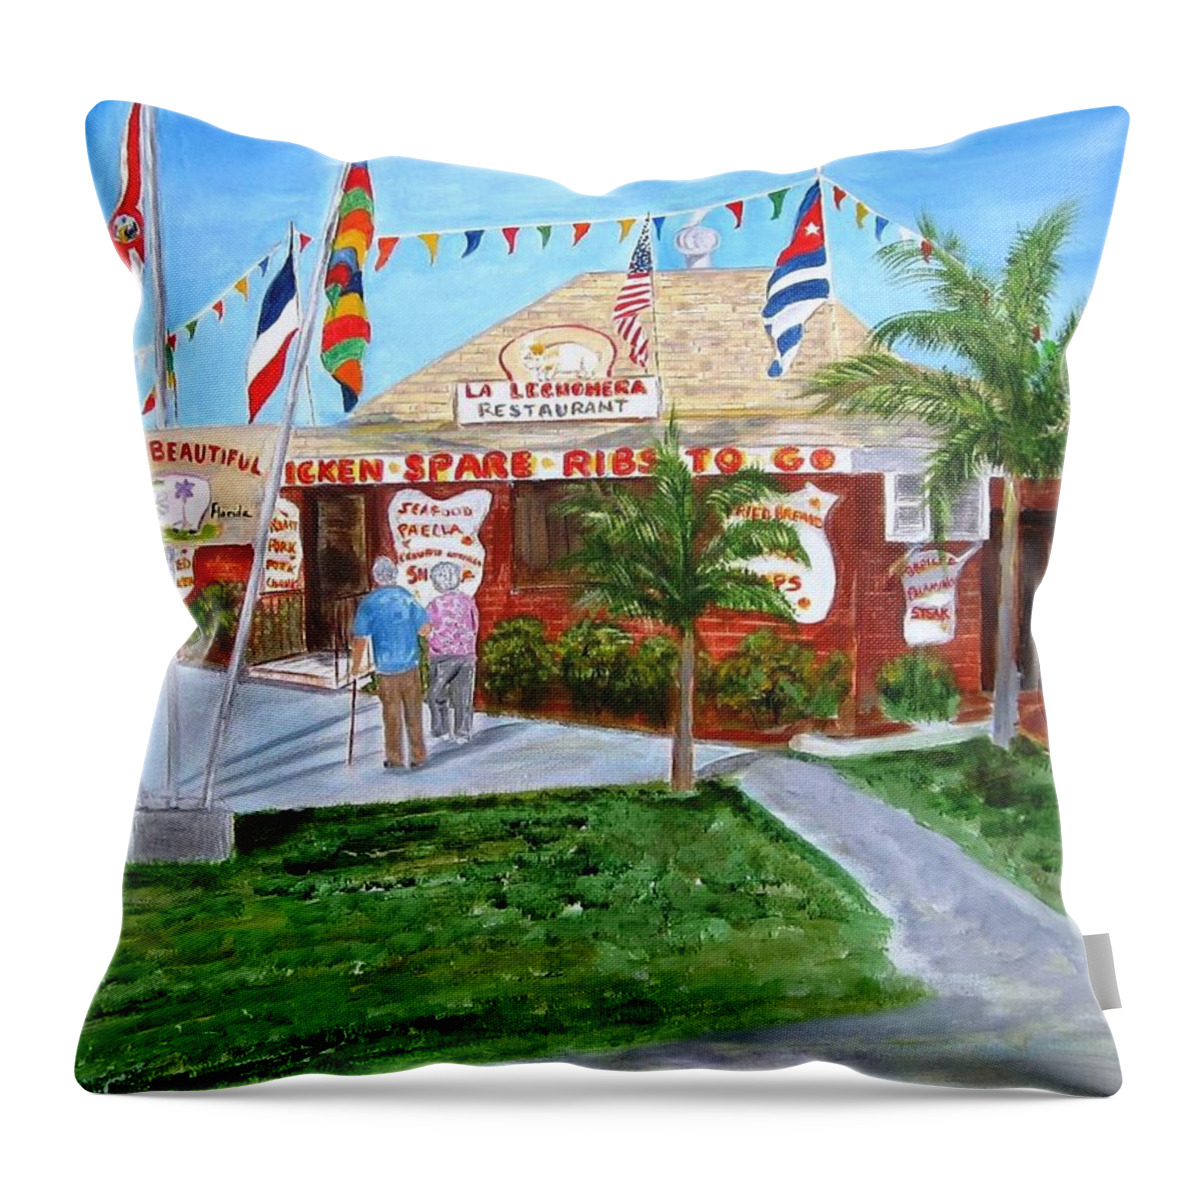 Key West Throw Pillow featuring the painting The Pig Restaurant by Linda Cabrera